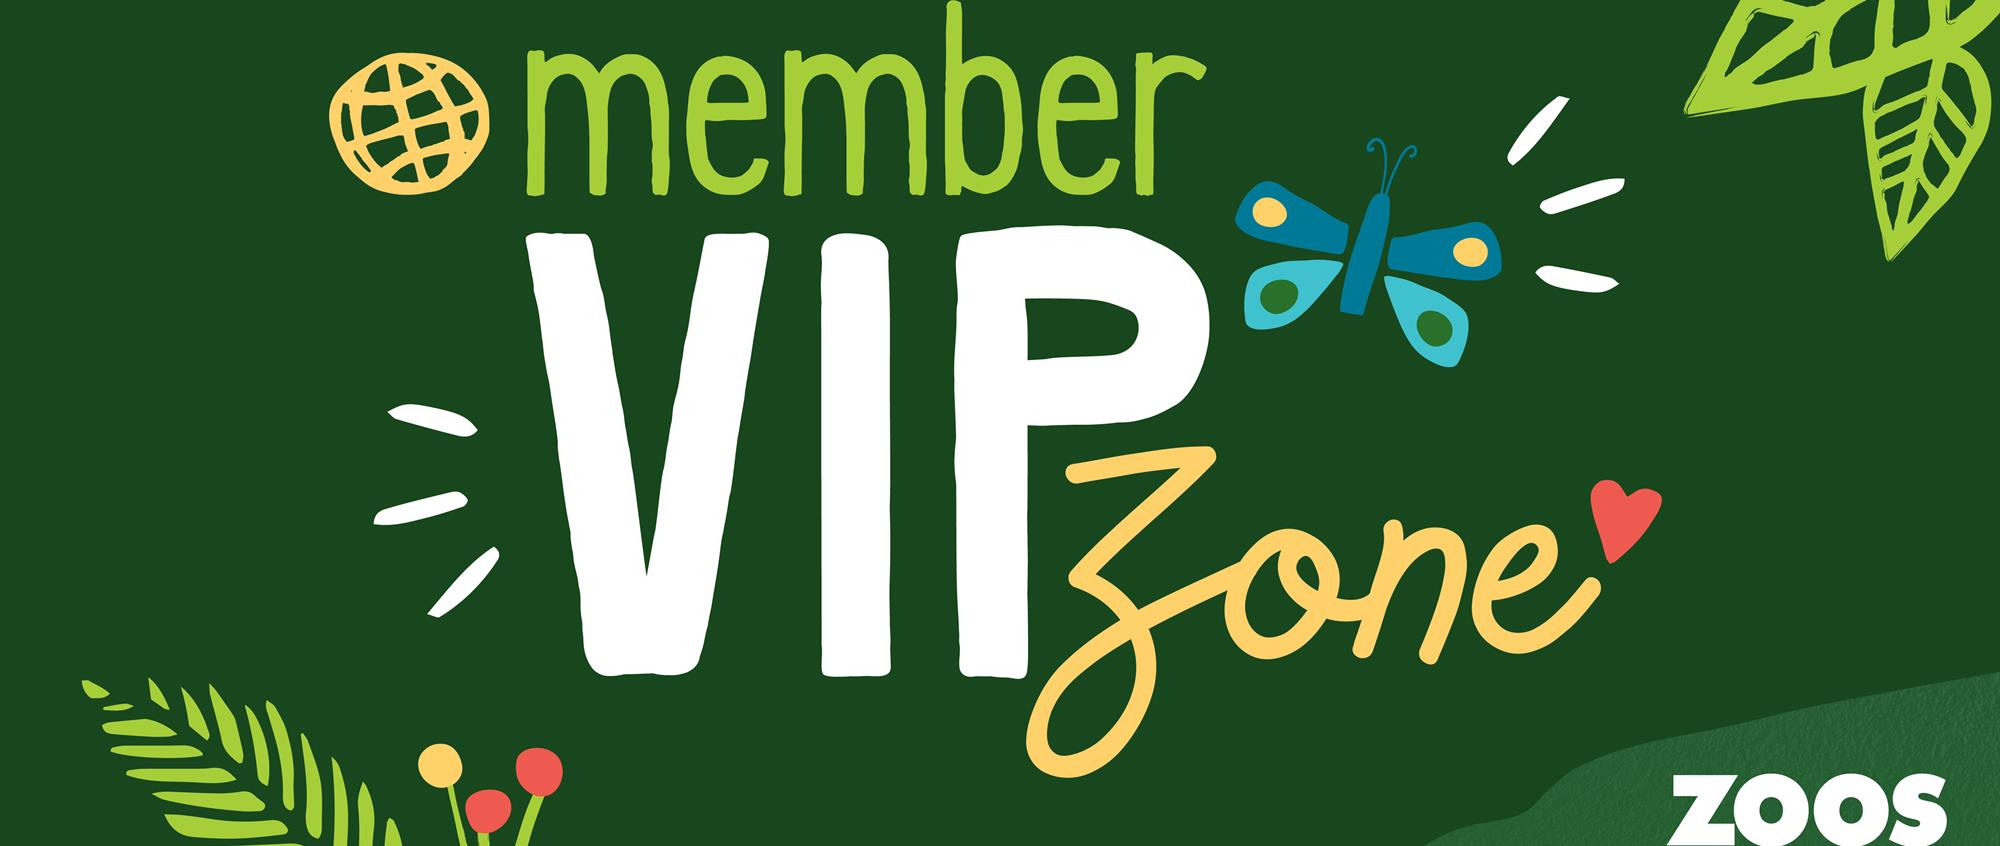 Member VIP Zone, Zoos Victoria Membership; a green logo graphic with ferns and a Butterfly.